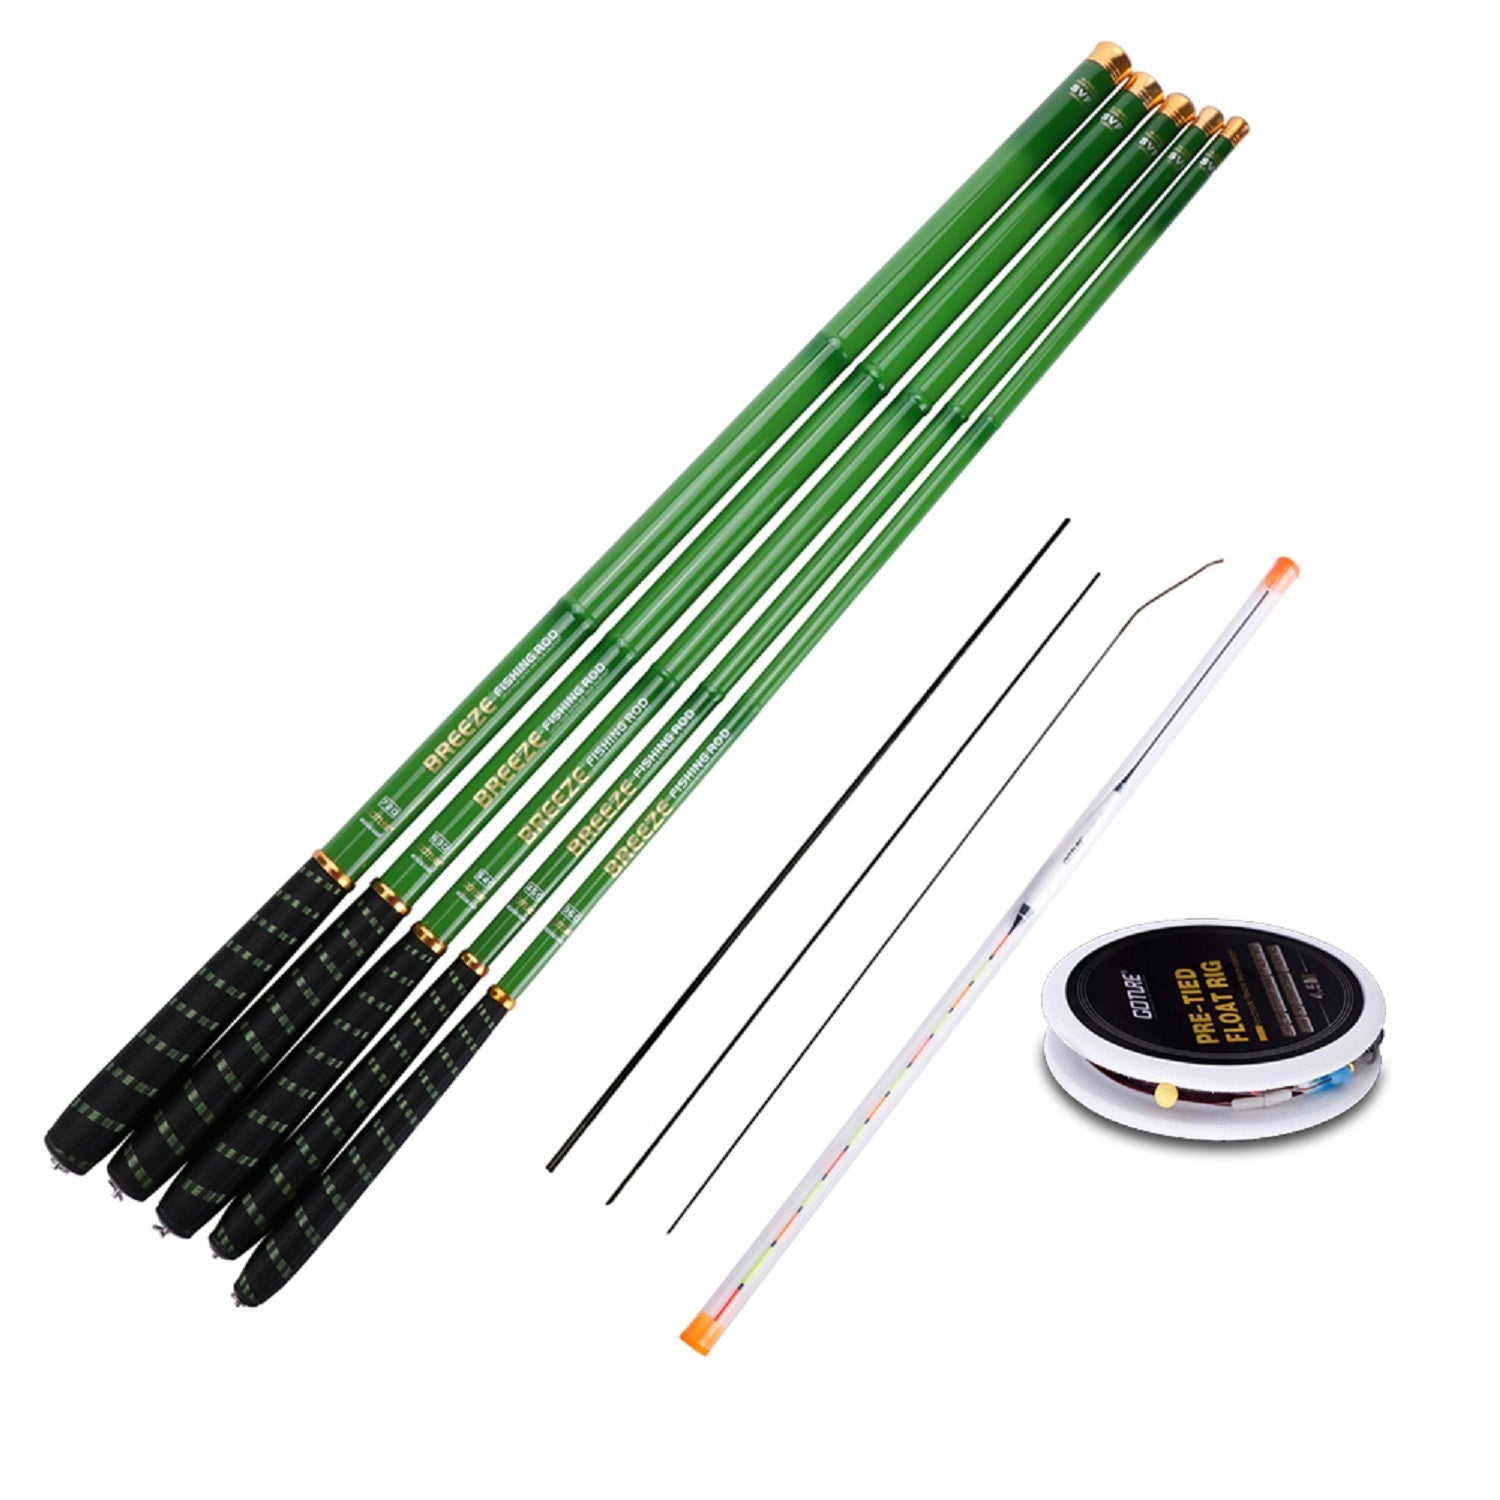 Goture Breeze Stream Fishing Rod, Carbon Fiber, Telescopic - 12FT  Pole+Vertical Fishing Floats+Pre-tied Fishing Rig